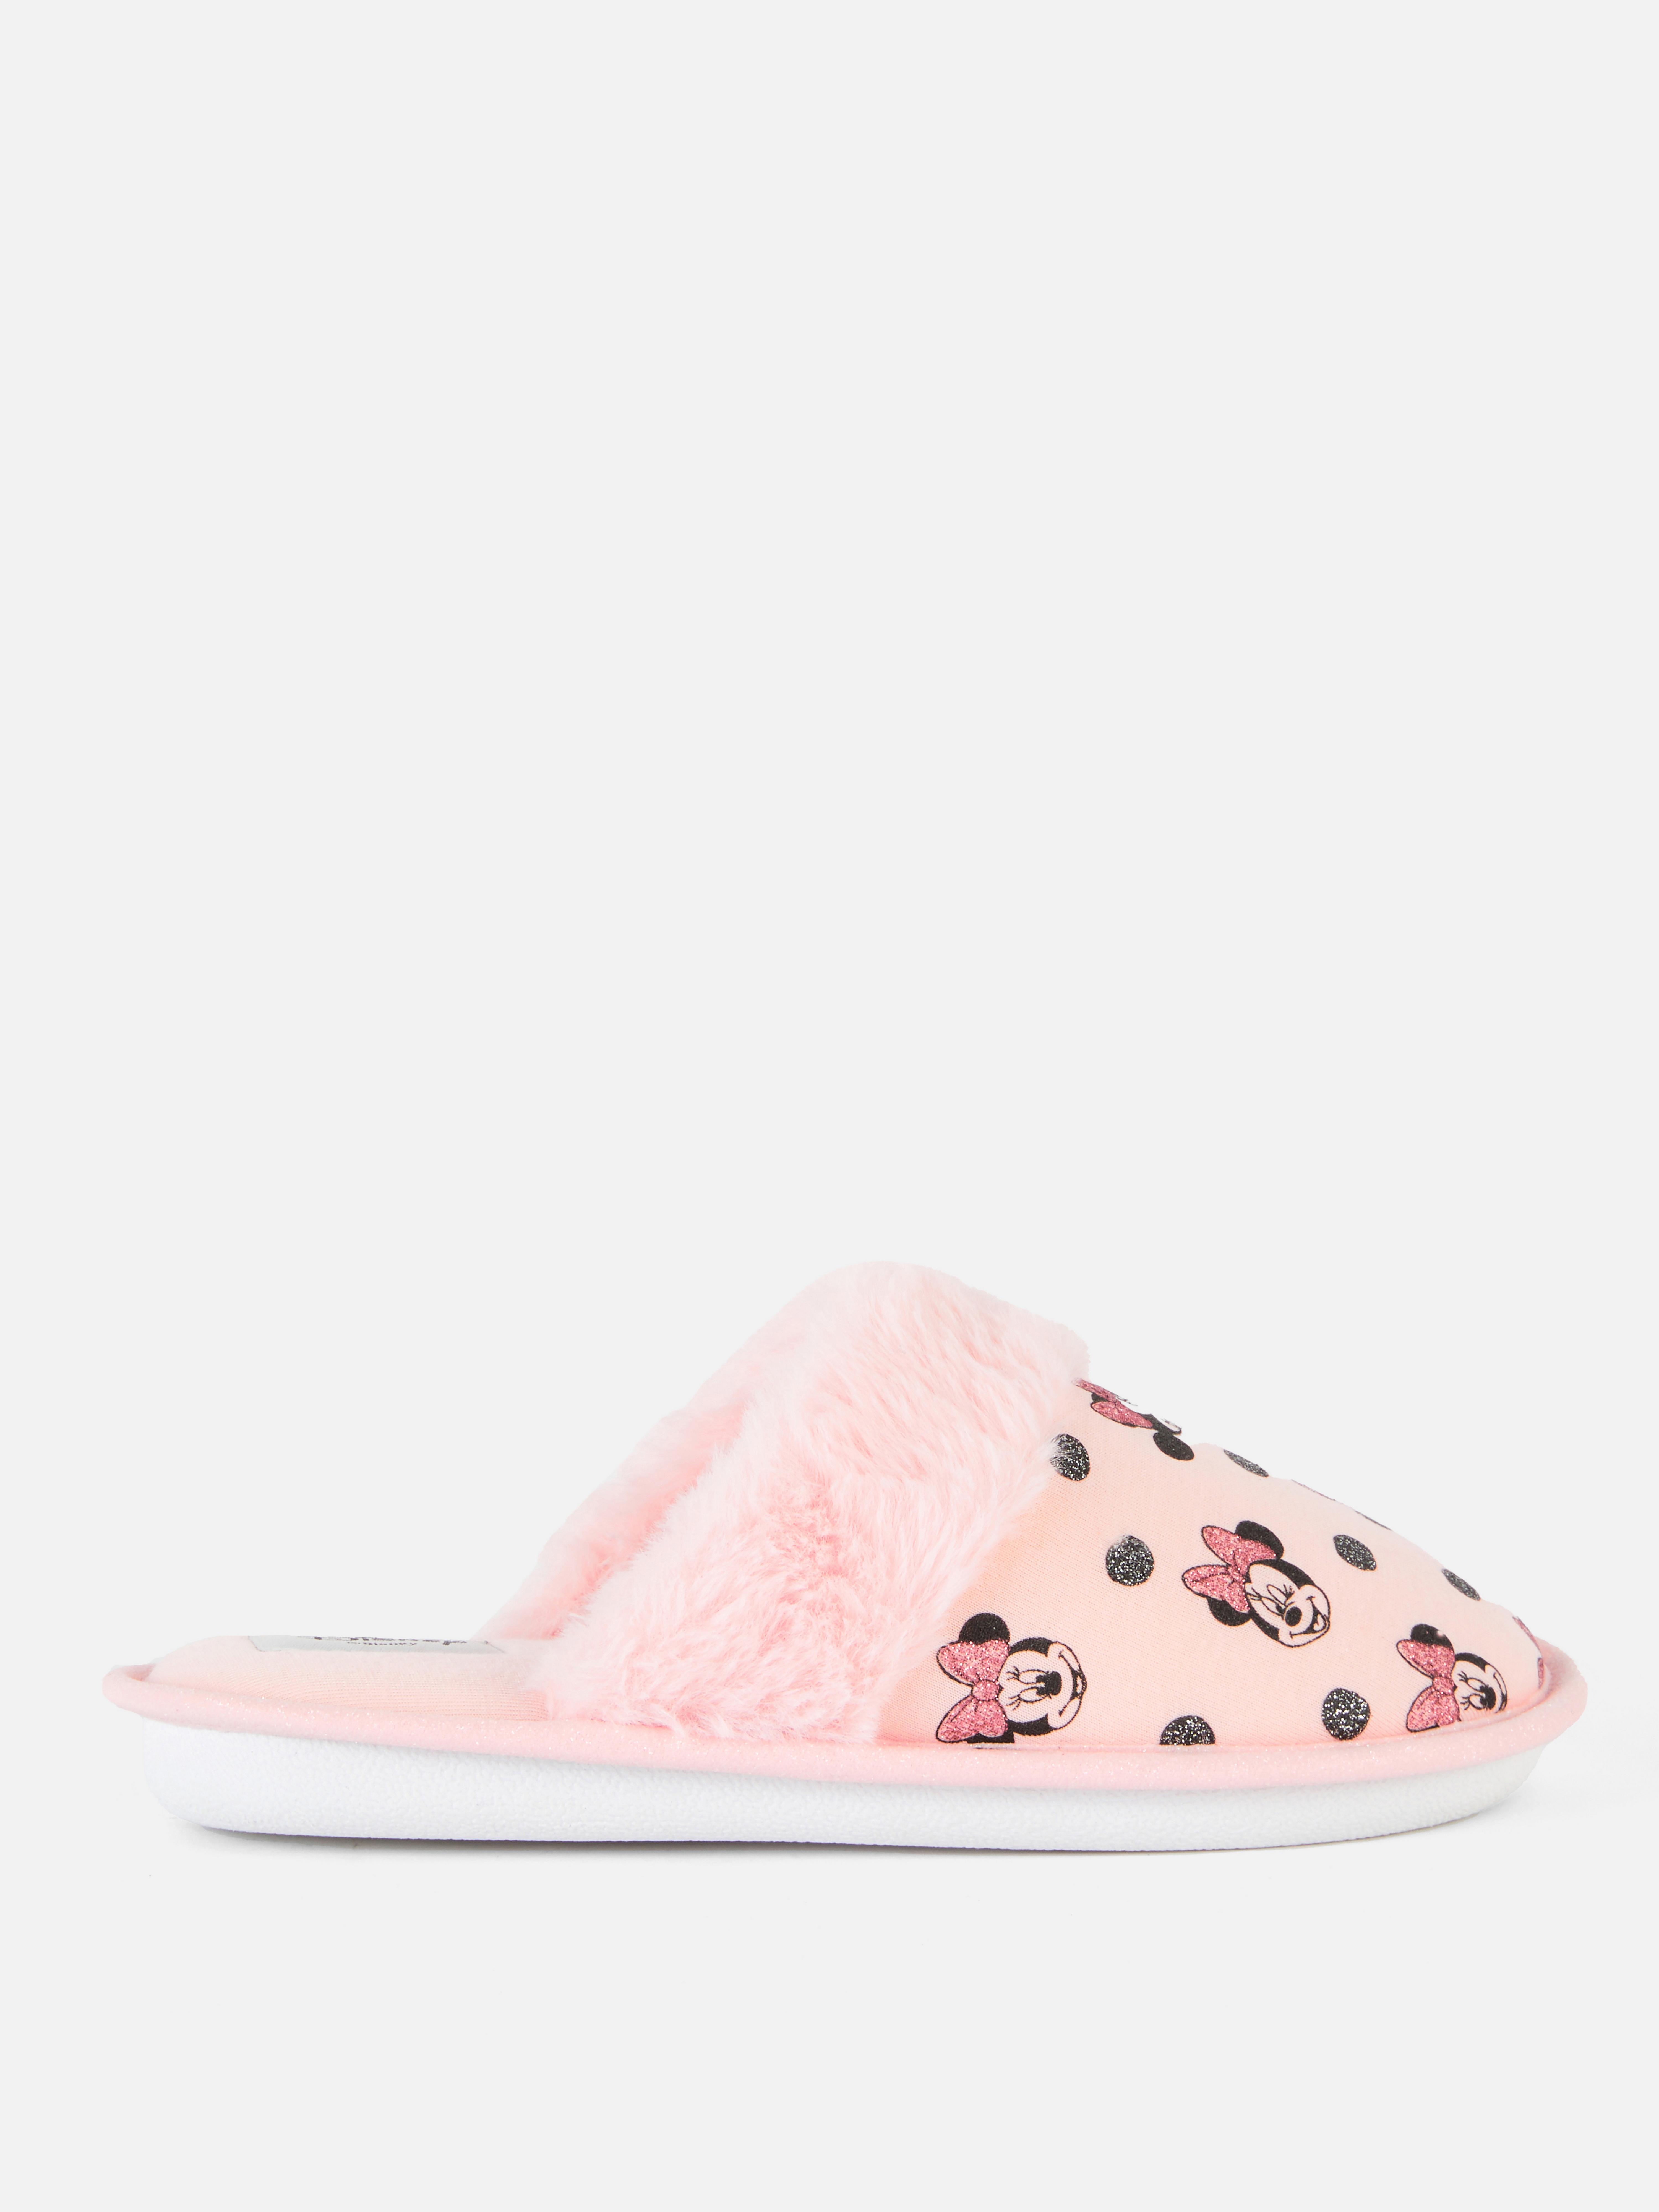 Disney's Minnie Mouse Pink Slippers